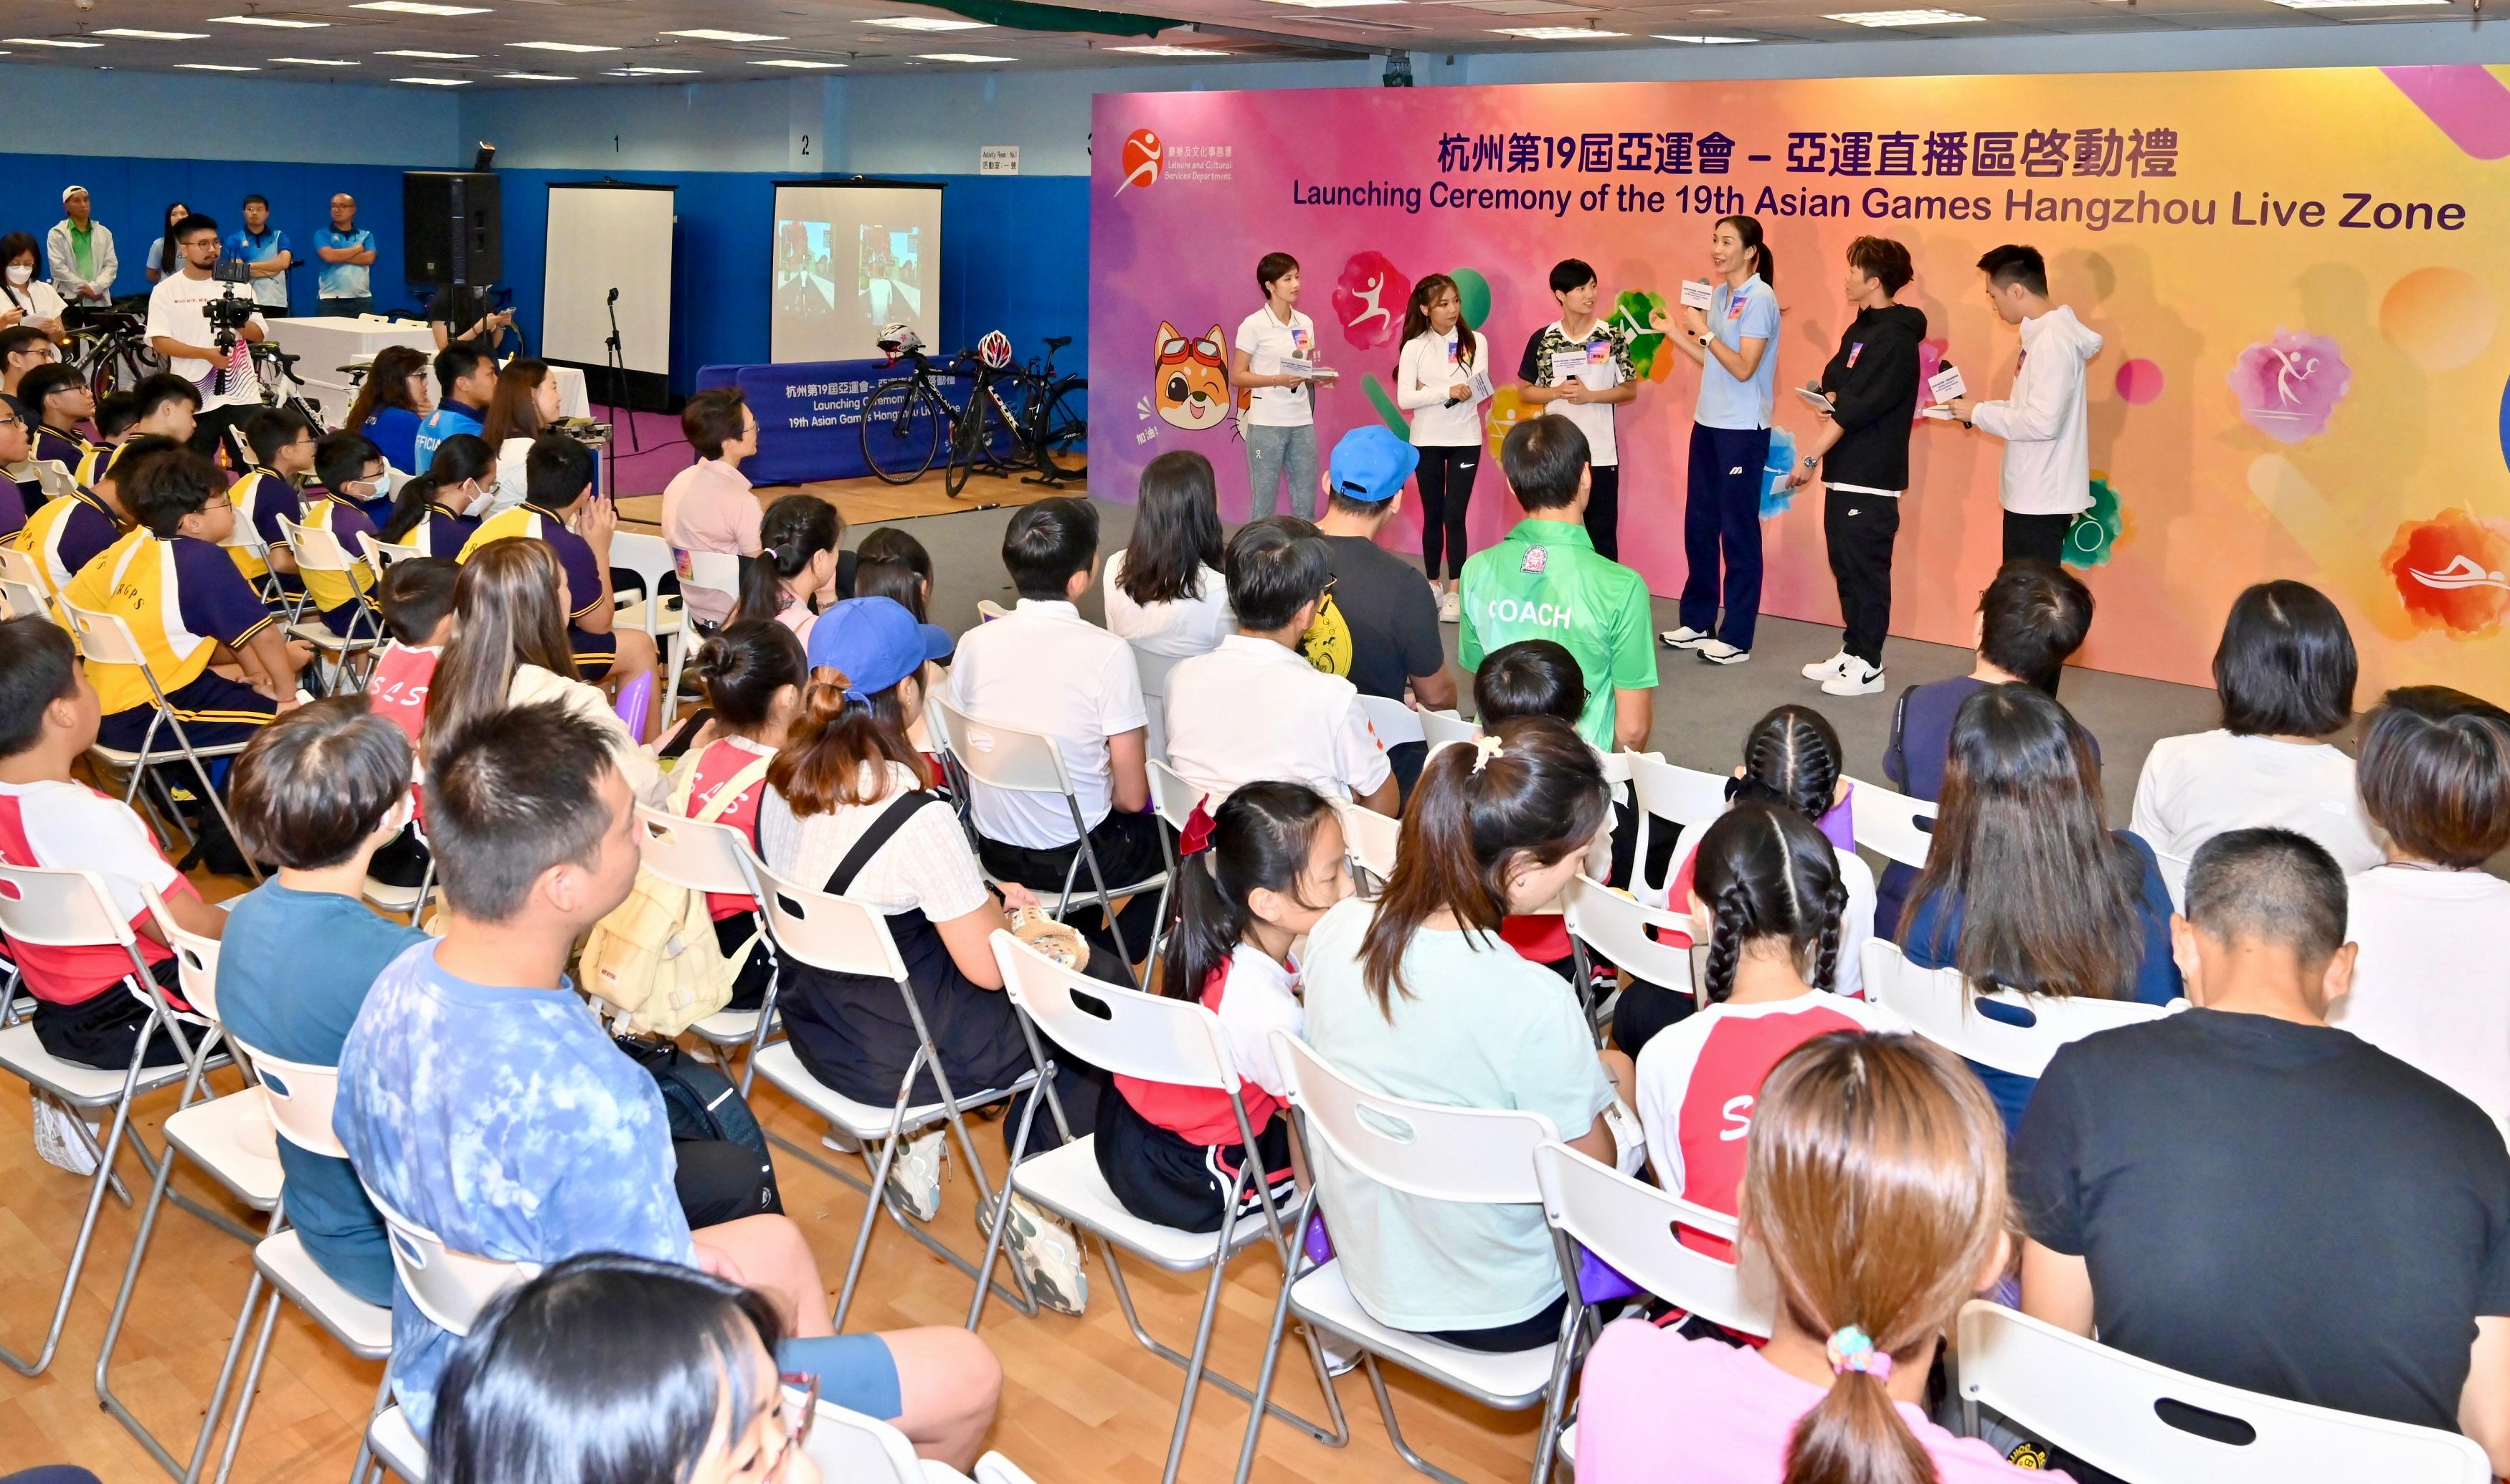 The Leisure and Cultural Services Department held the "Launching Ceremony of the 19th Asian Games Hangzhou Live Zone" at the Secondary Hall of the Kowloon Park Sports Centre today (September 23). Photo shows former China women’s volleyball team captain Sun Yue (third right) speaking at the sharing session.